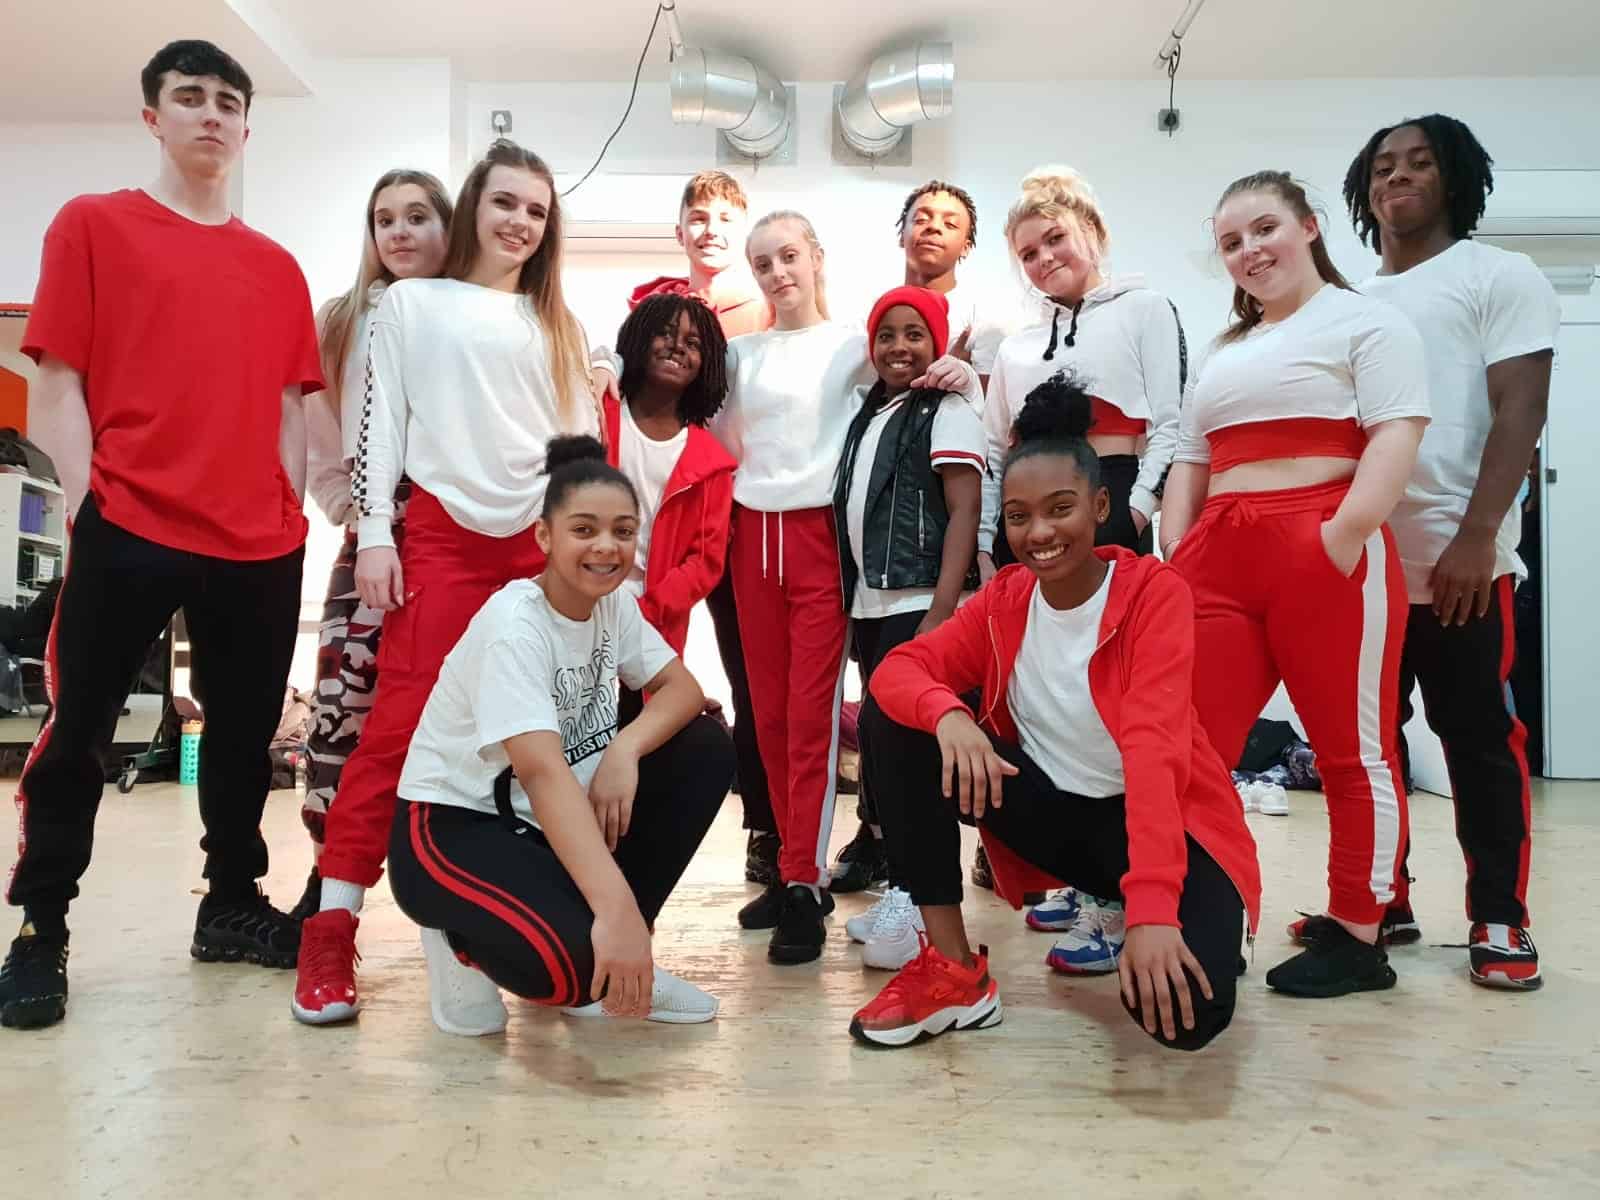 The Bermondsey-based street dance act Prospects Fraternity have made it to the live-shows of the BBC 1 competition The Greatest Dancer